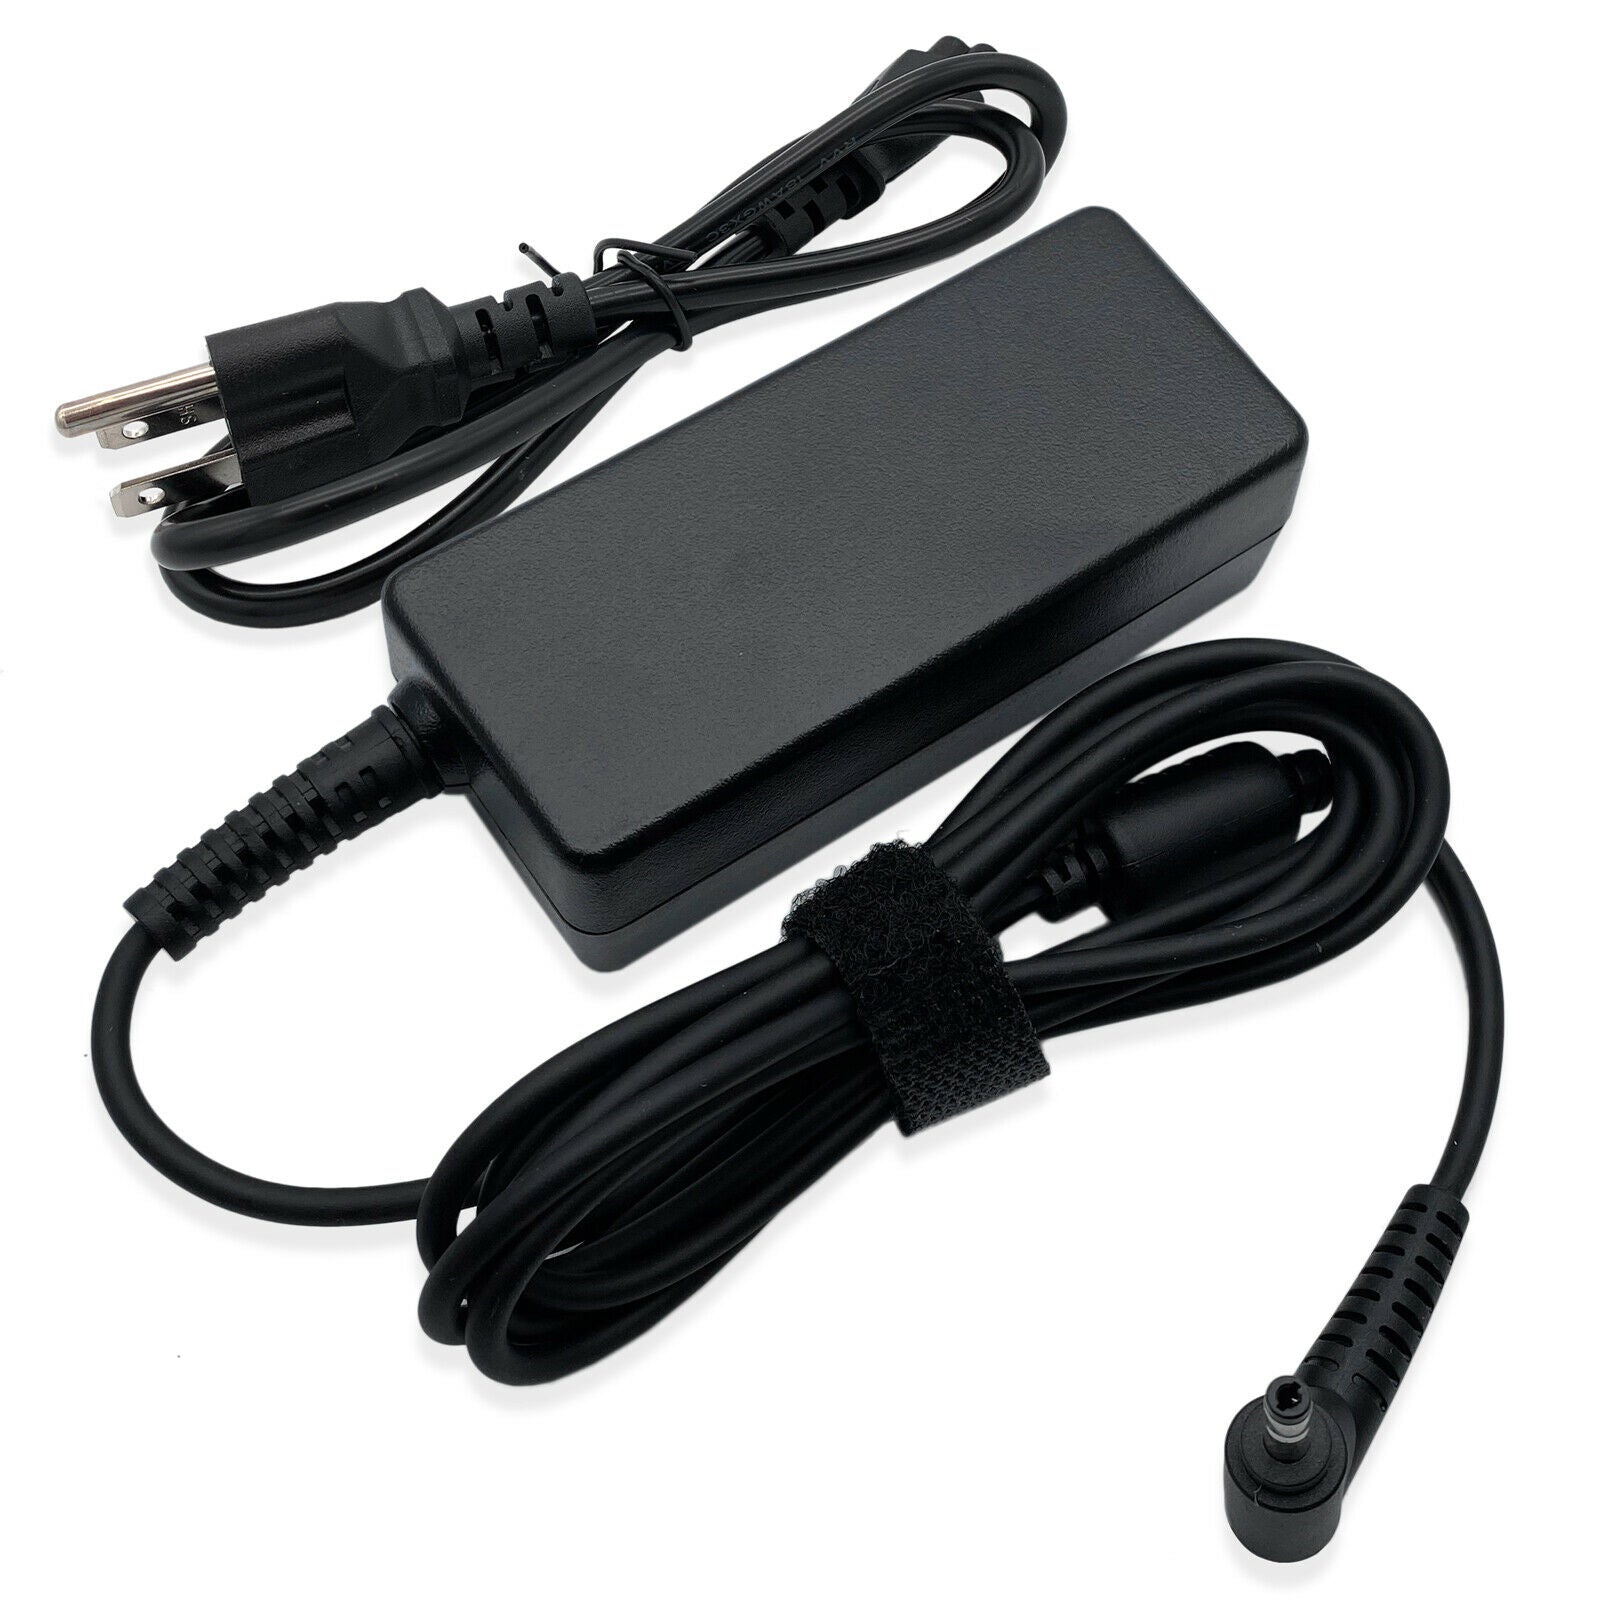 New Genuine Lenovo ideapad Gaming 3 Laptop 15IMH05 Type 81Y4 AC Power  Charger